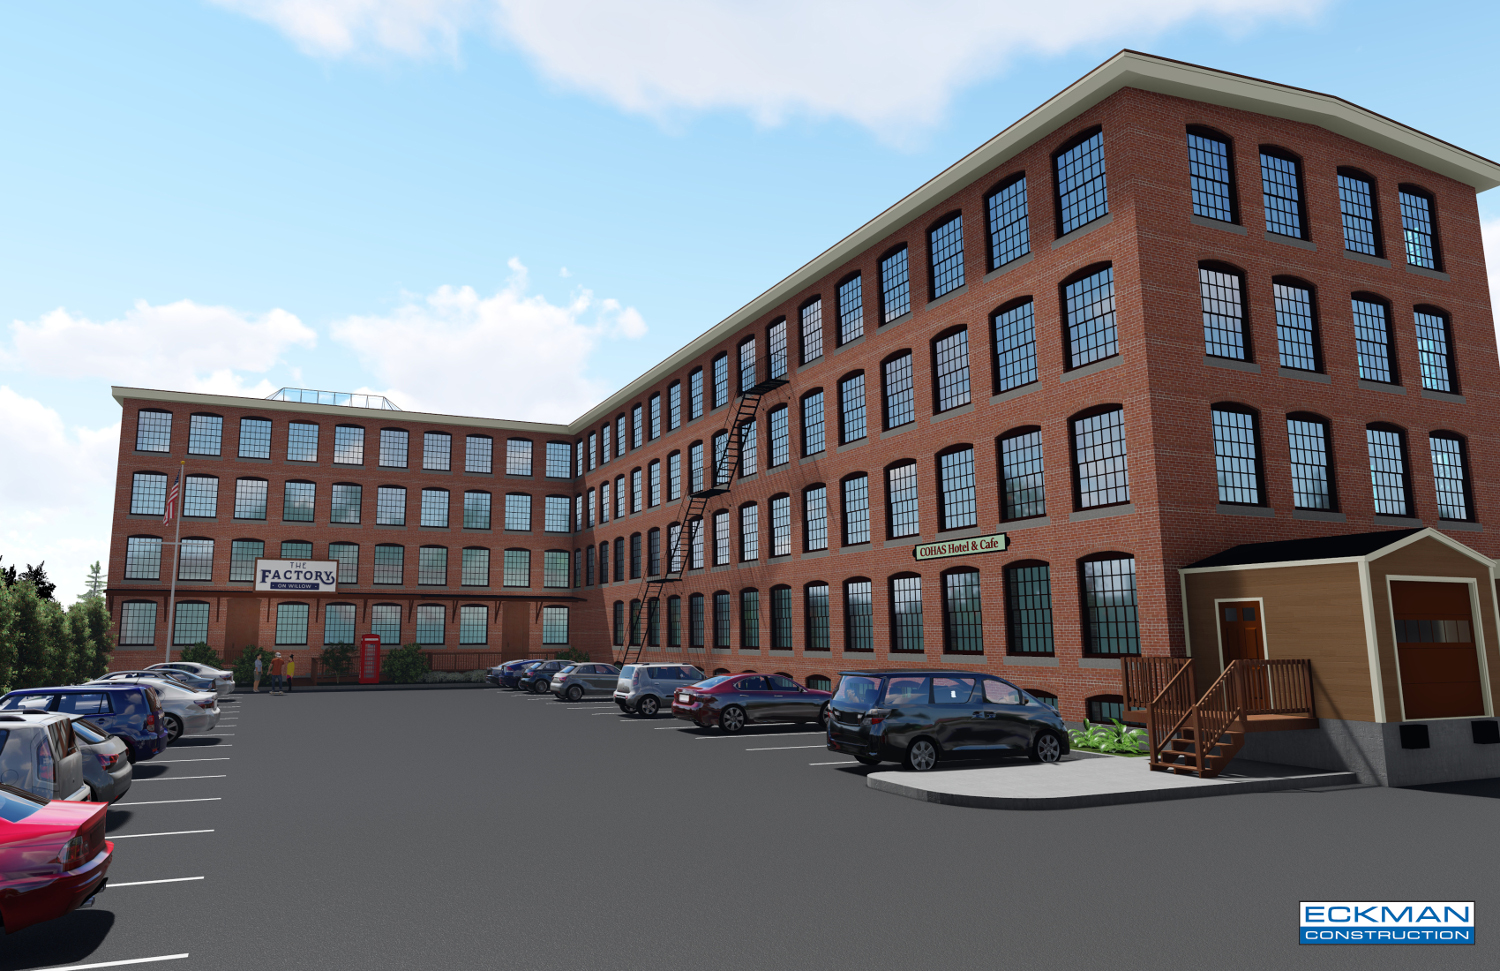 Architect's rendering of outside of Factory on Elm bulding